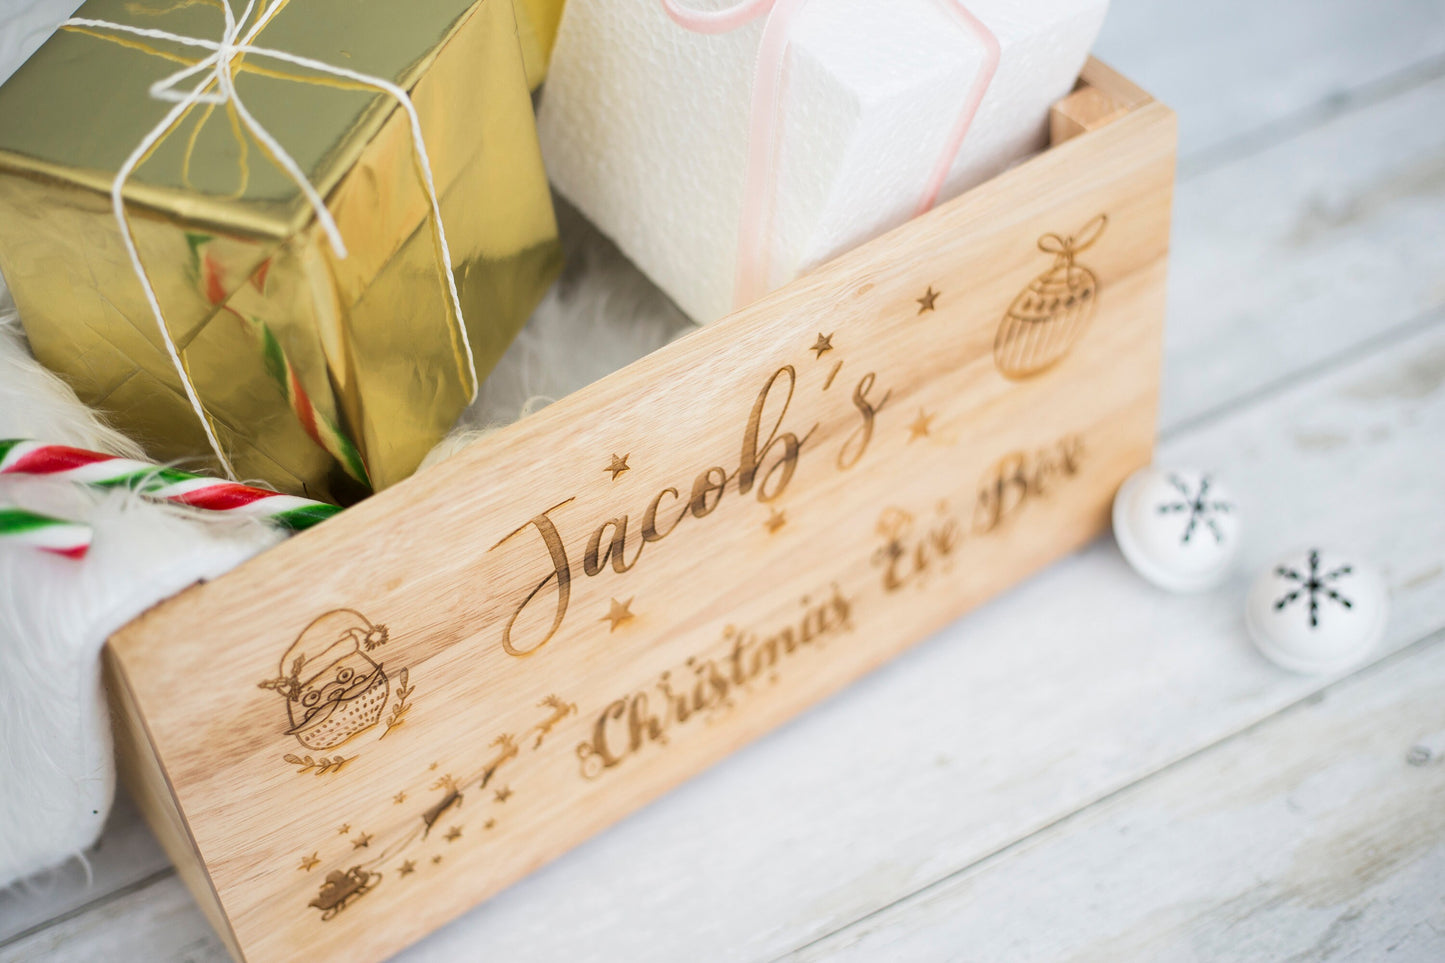 Personalised Wooden crate Box, Santa Christmas Eve Crate Gift